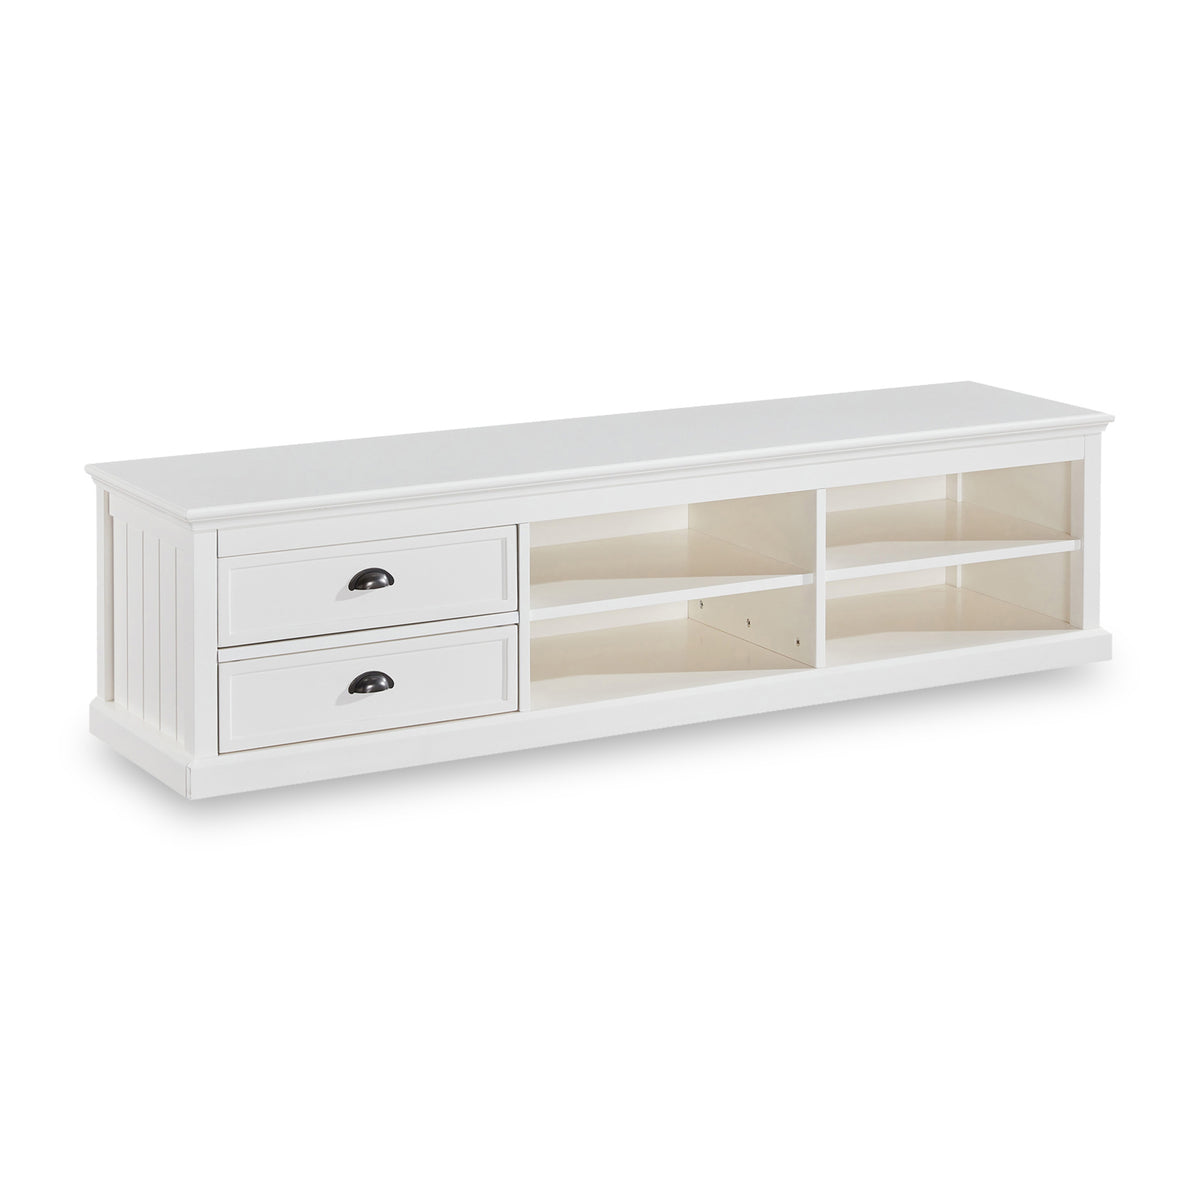 Leighton White 180cm Extra Wide TV Unit from Roseland Furniture